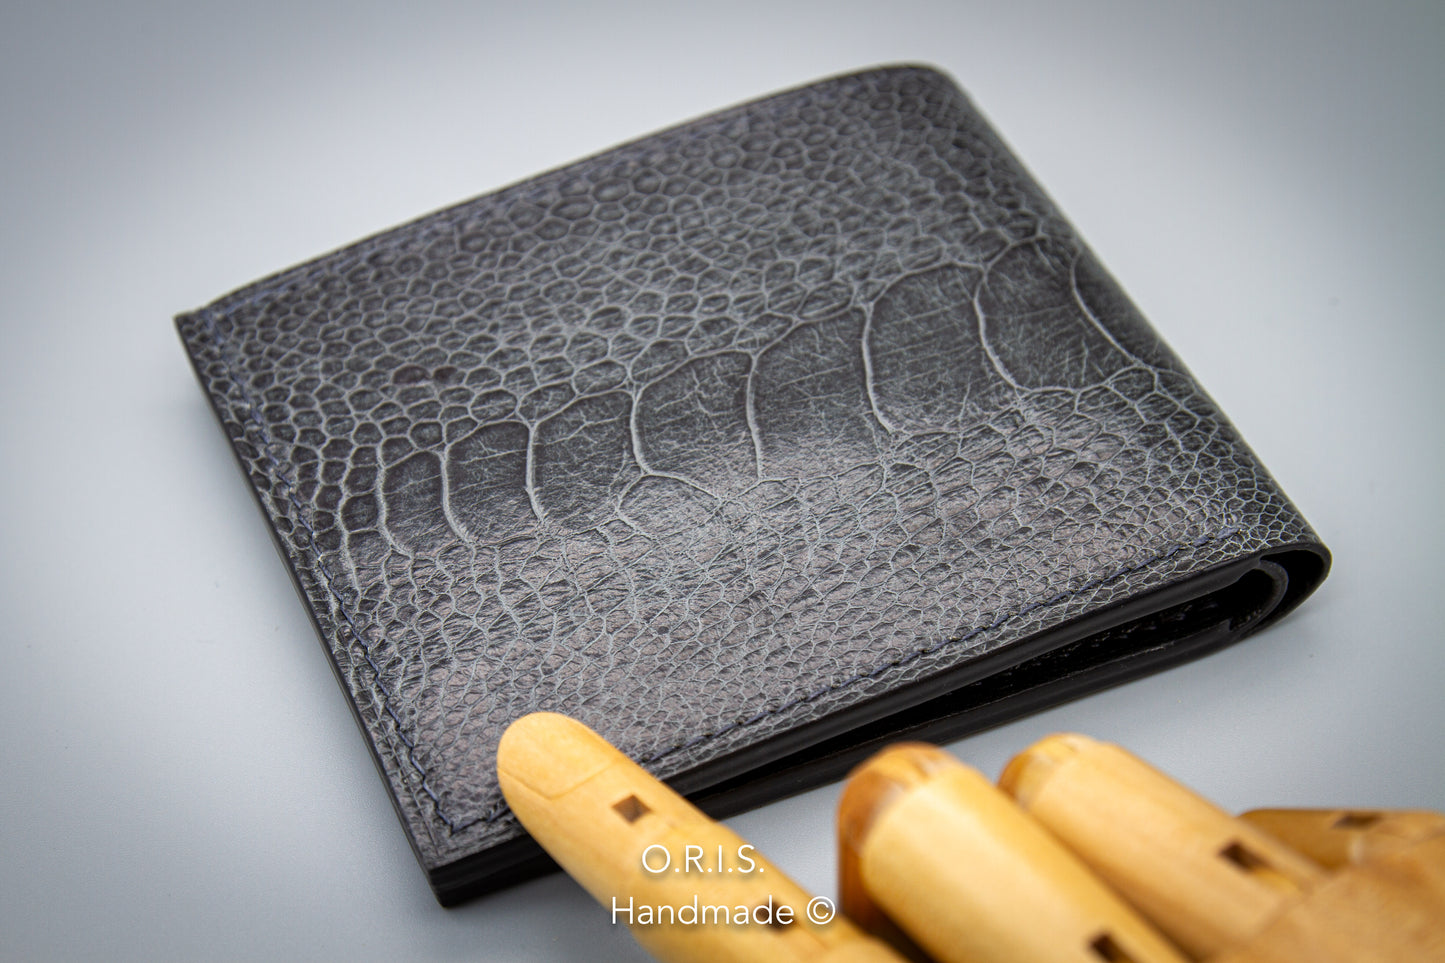 Mini Crocodile Leather Wallet / Ostrich leather wallet - super nice gift.